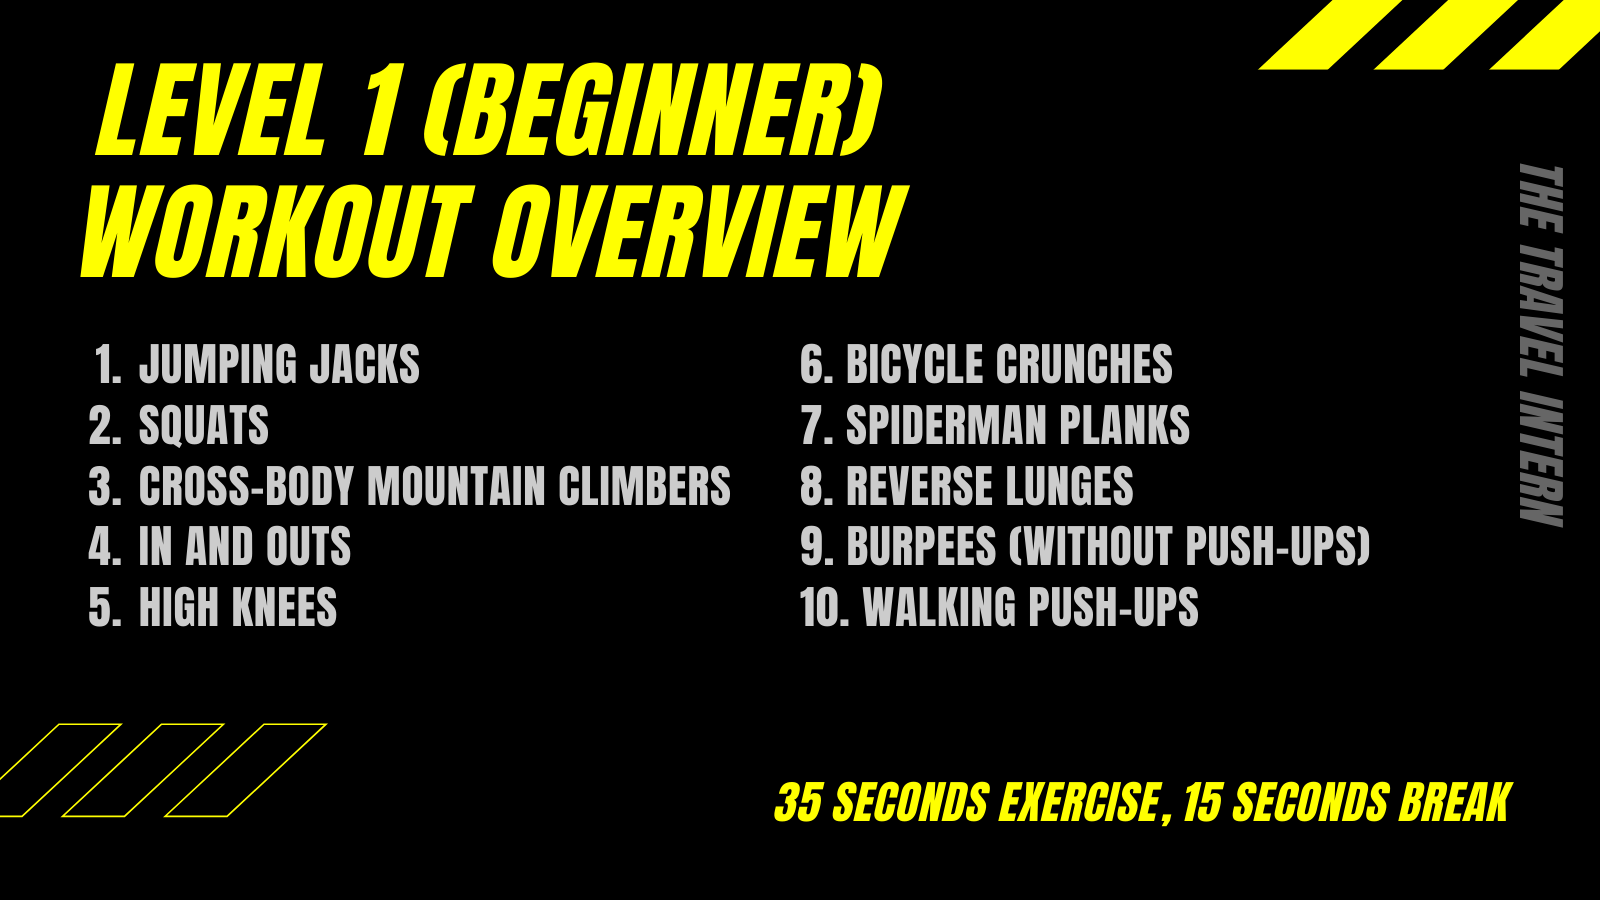 Level 1 (Beginner) Workout - Home Workouts